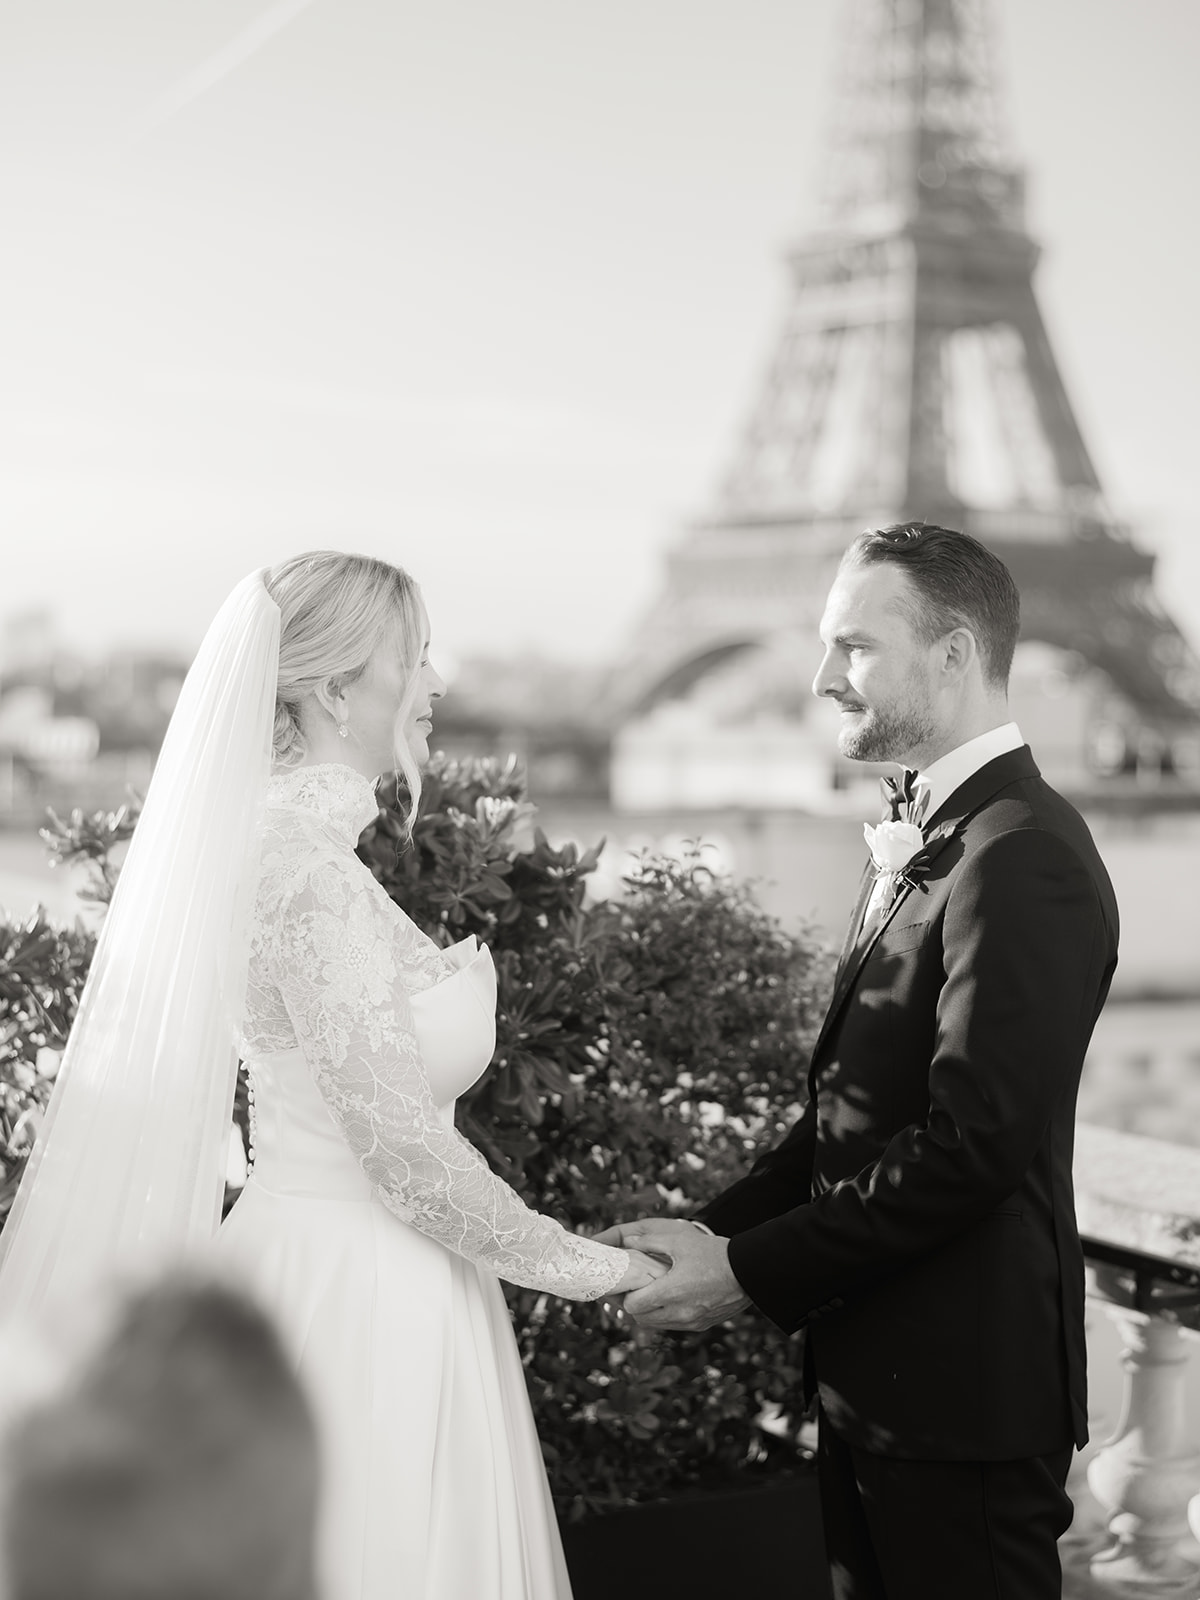 The bride and groom look at each other during the ceremony with a view of the Eiffel Tower